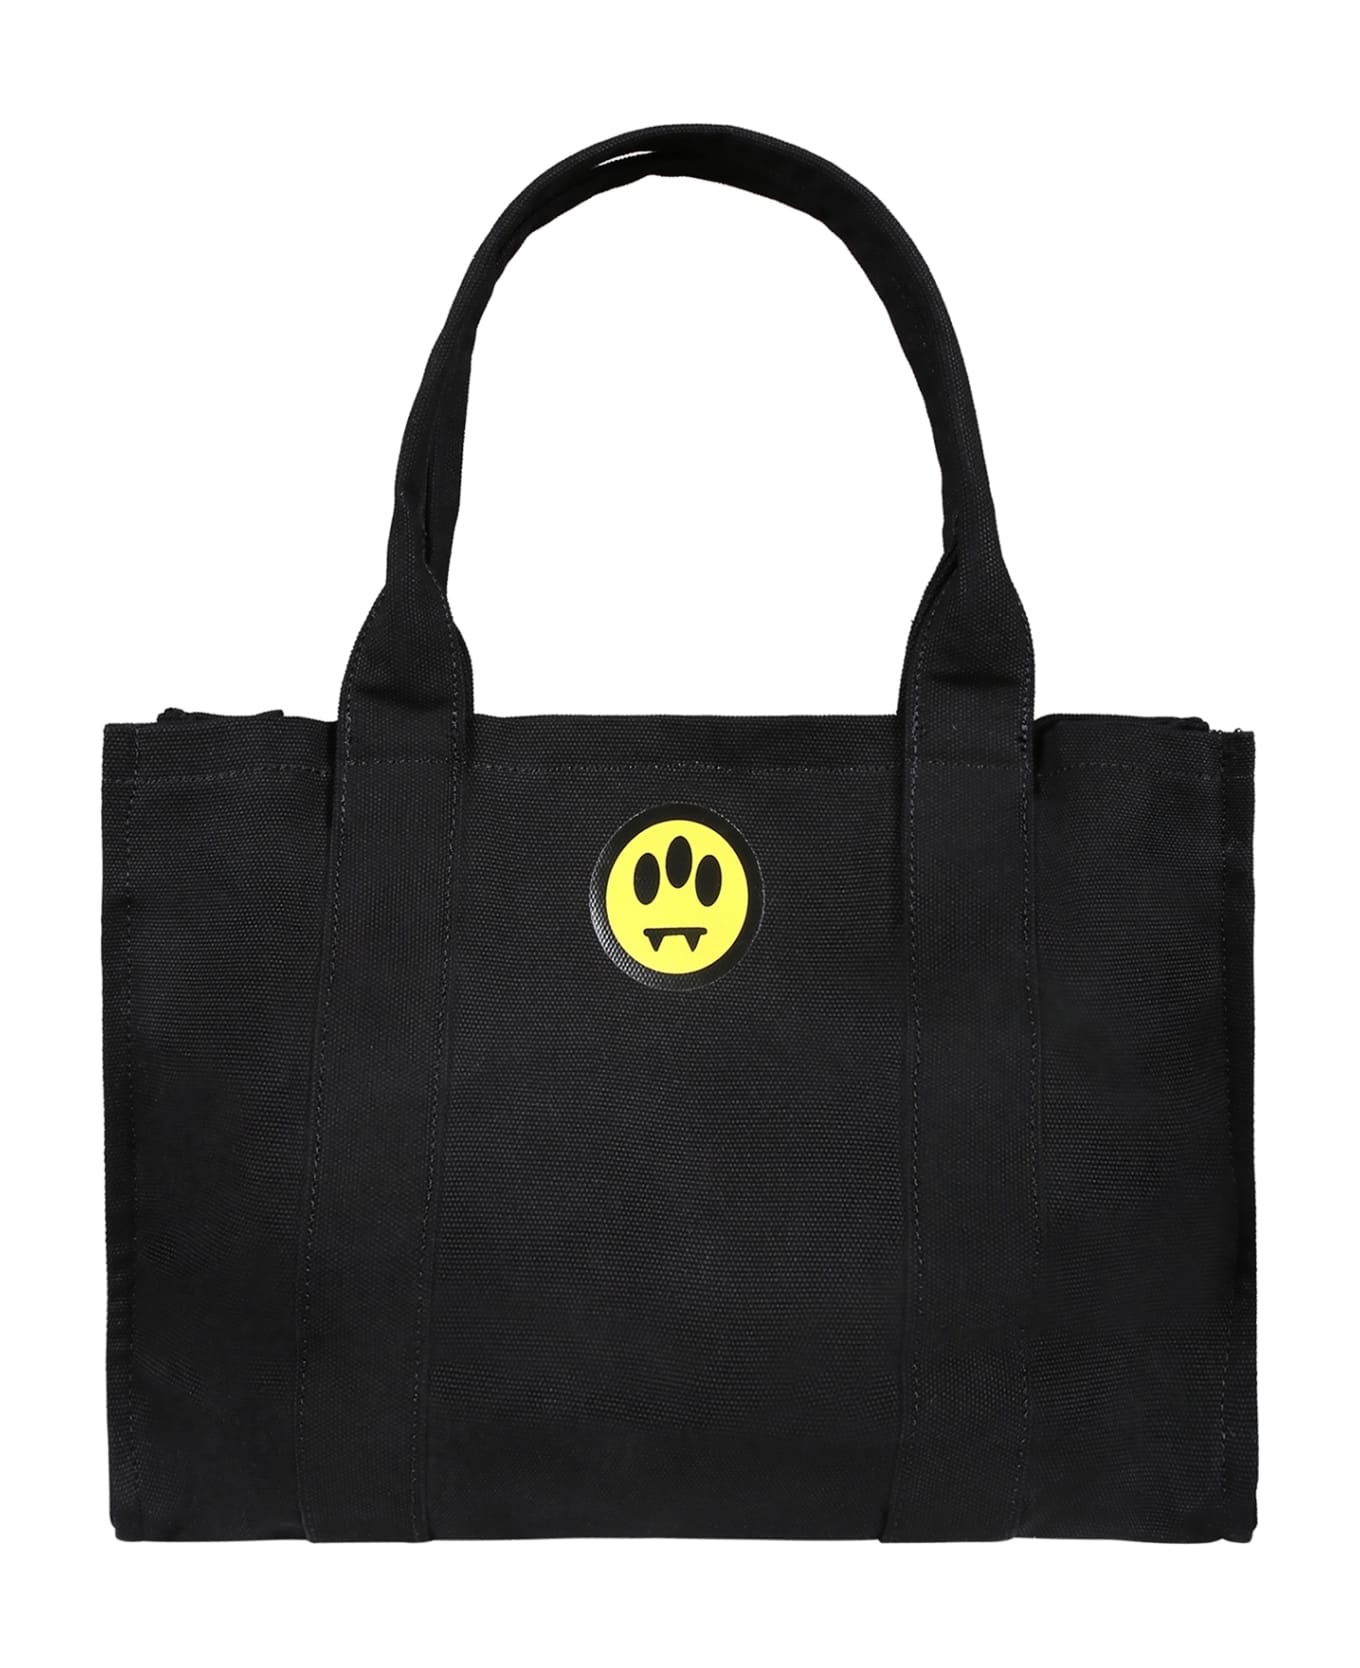 Barrow Black Bag For Girl With Logo And Smiley - Black アクセサリー＆ギフト